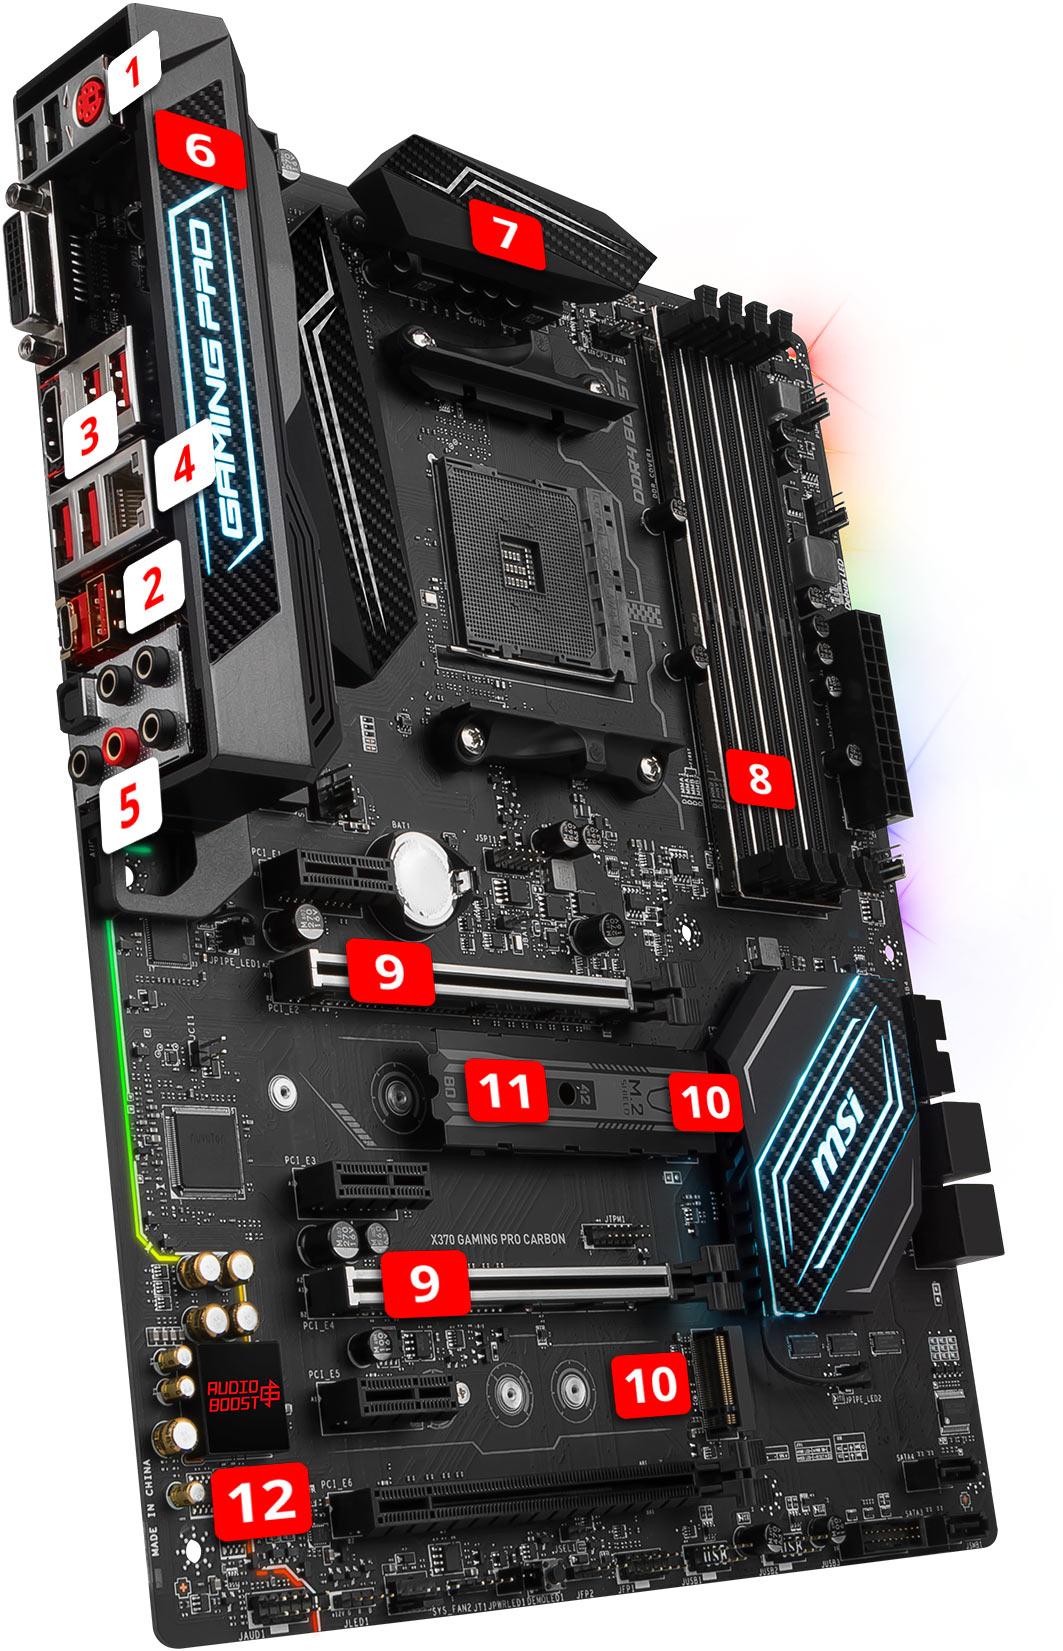 MSI X370 GAMING Pro Carbon overview